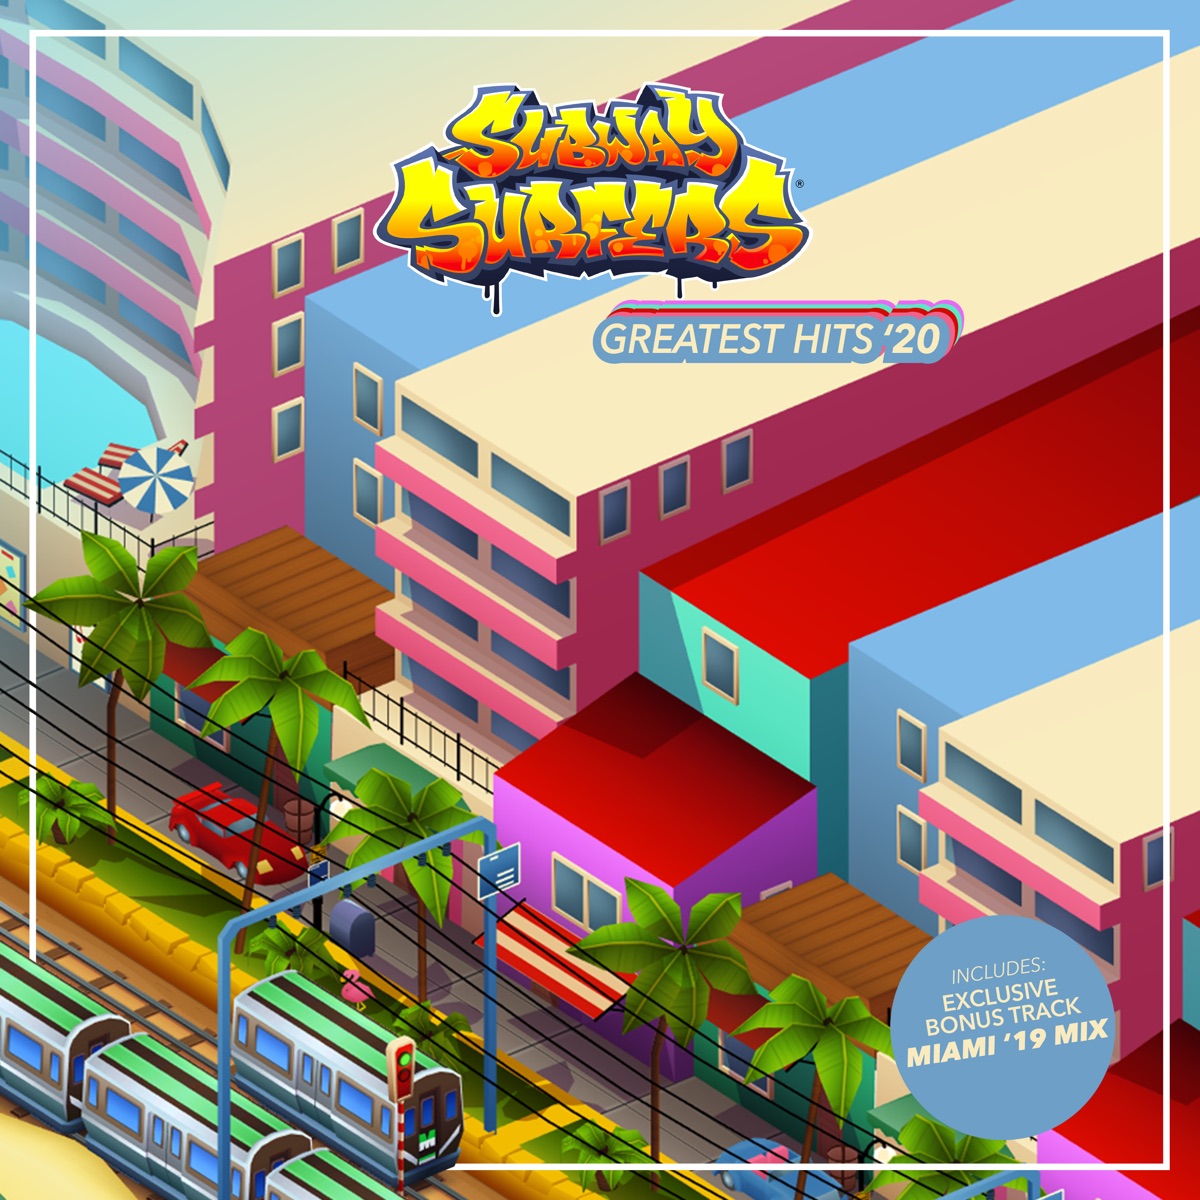 Berlin Beats - EP by Subway Surfers